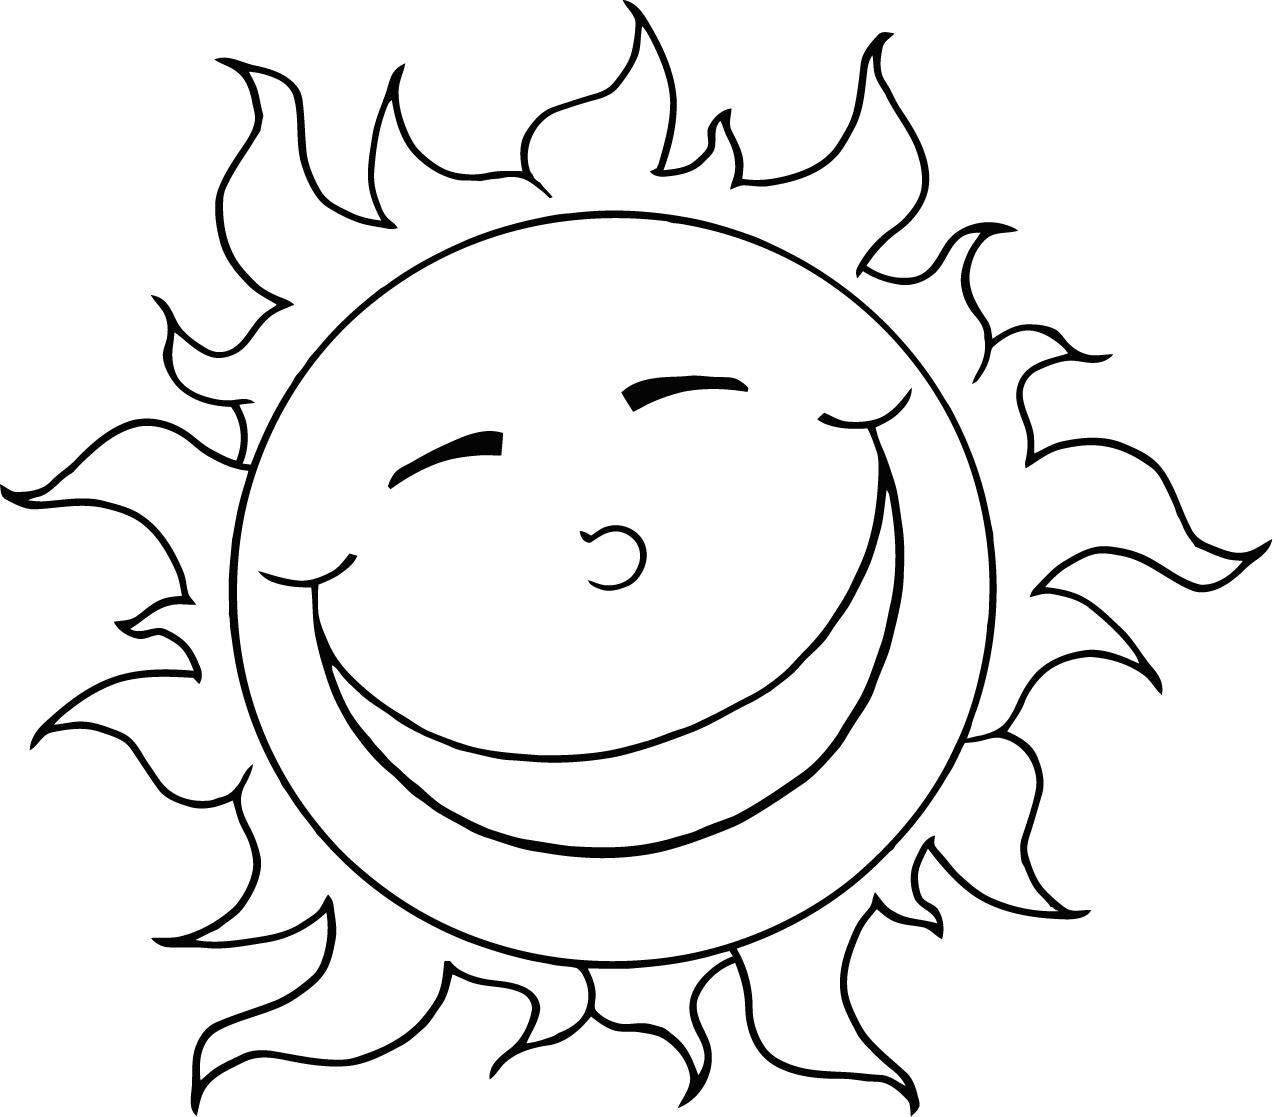 sun picture for kids coloring - Coloring Point - Coloring Point